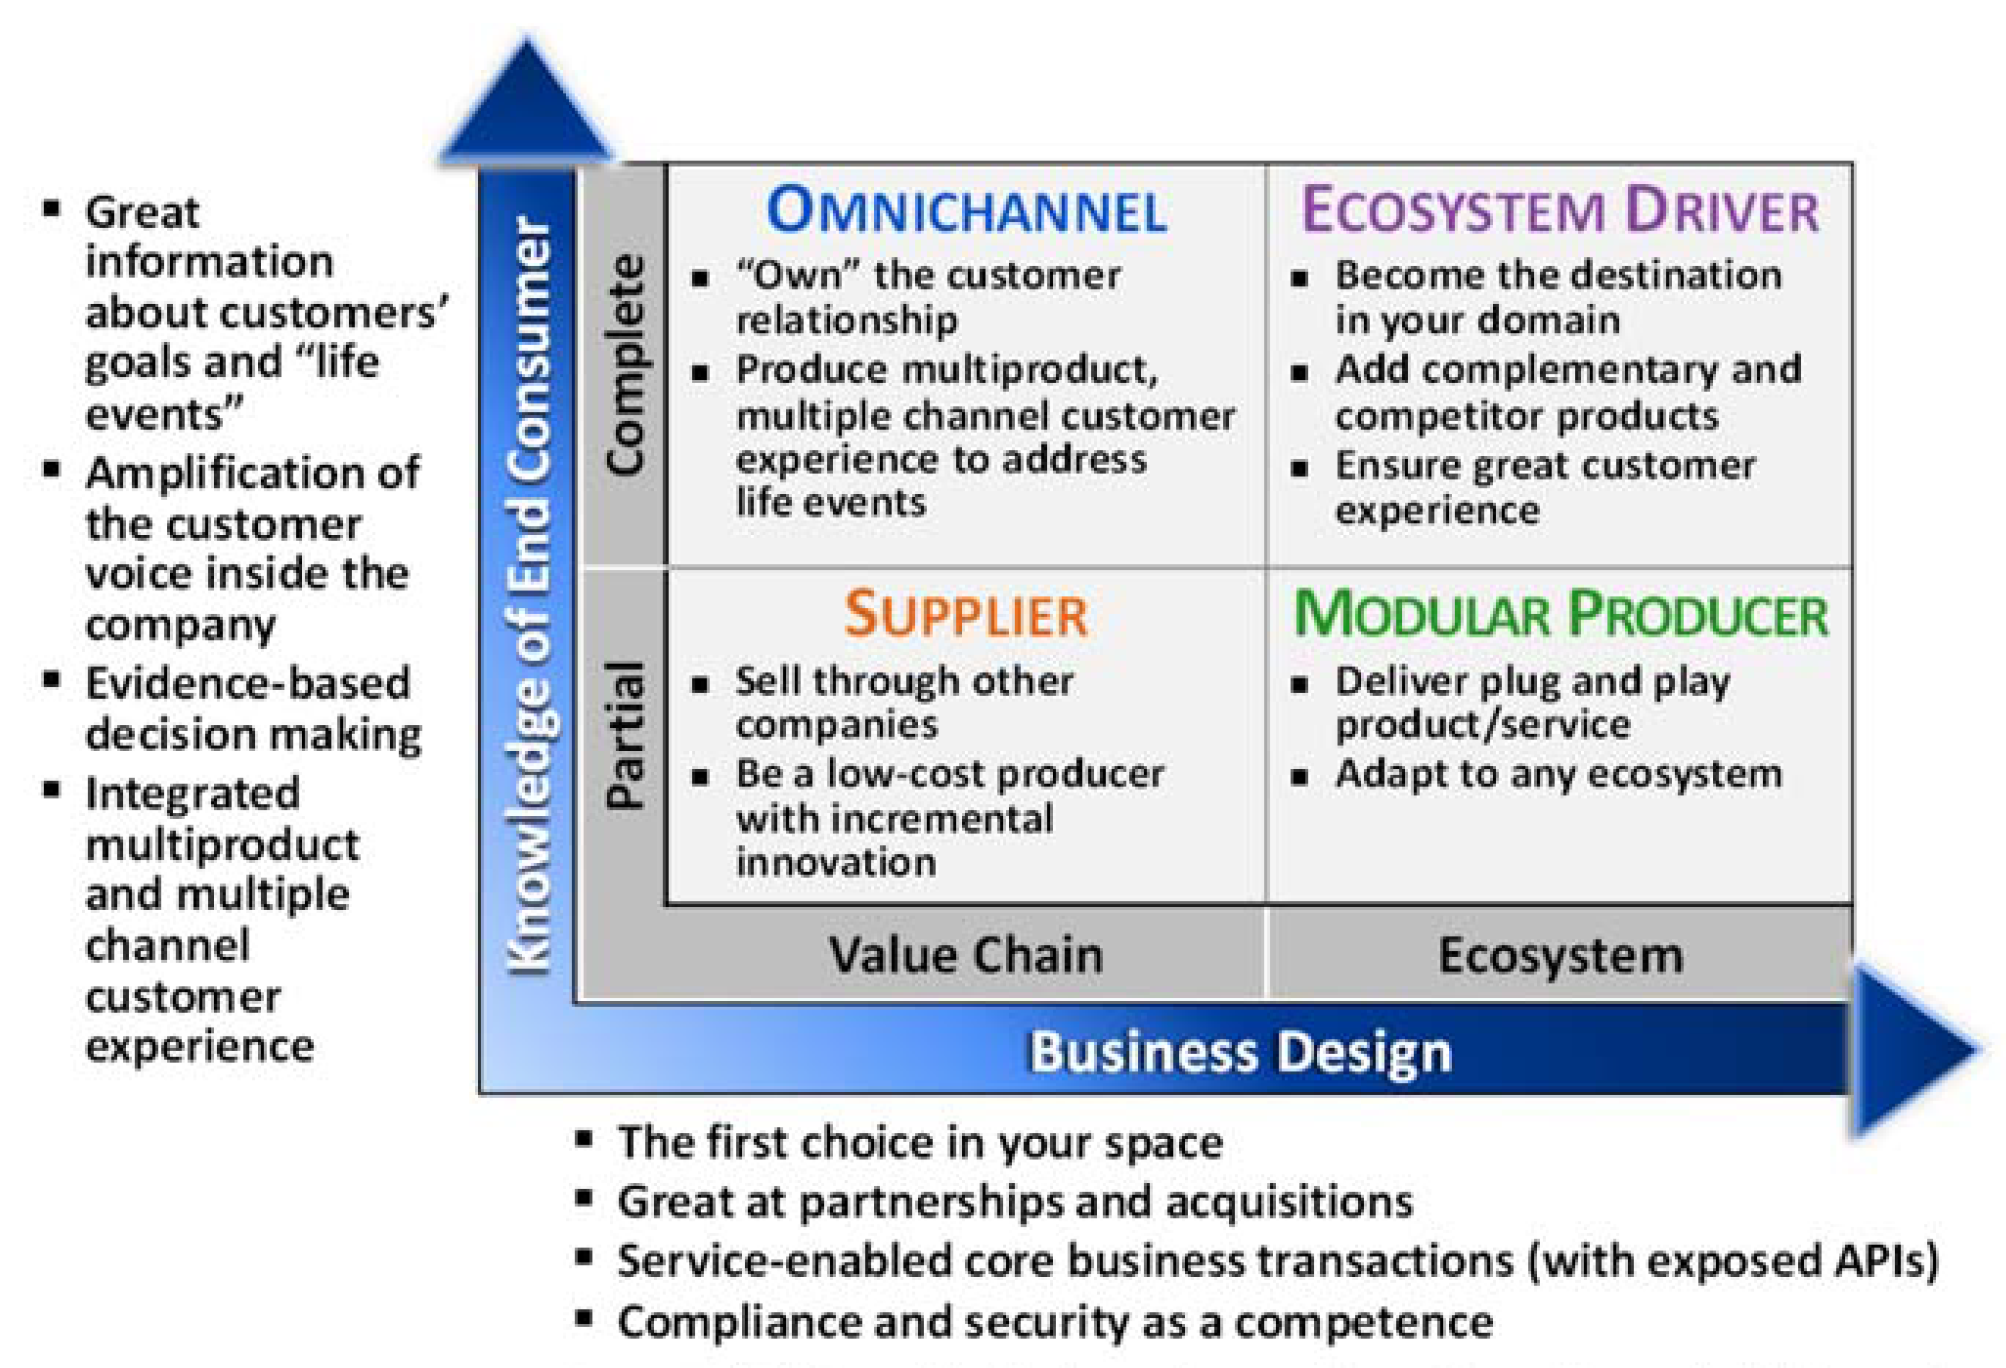 Figure 1: Becoming an Ecosystem Driver